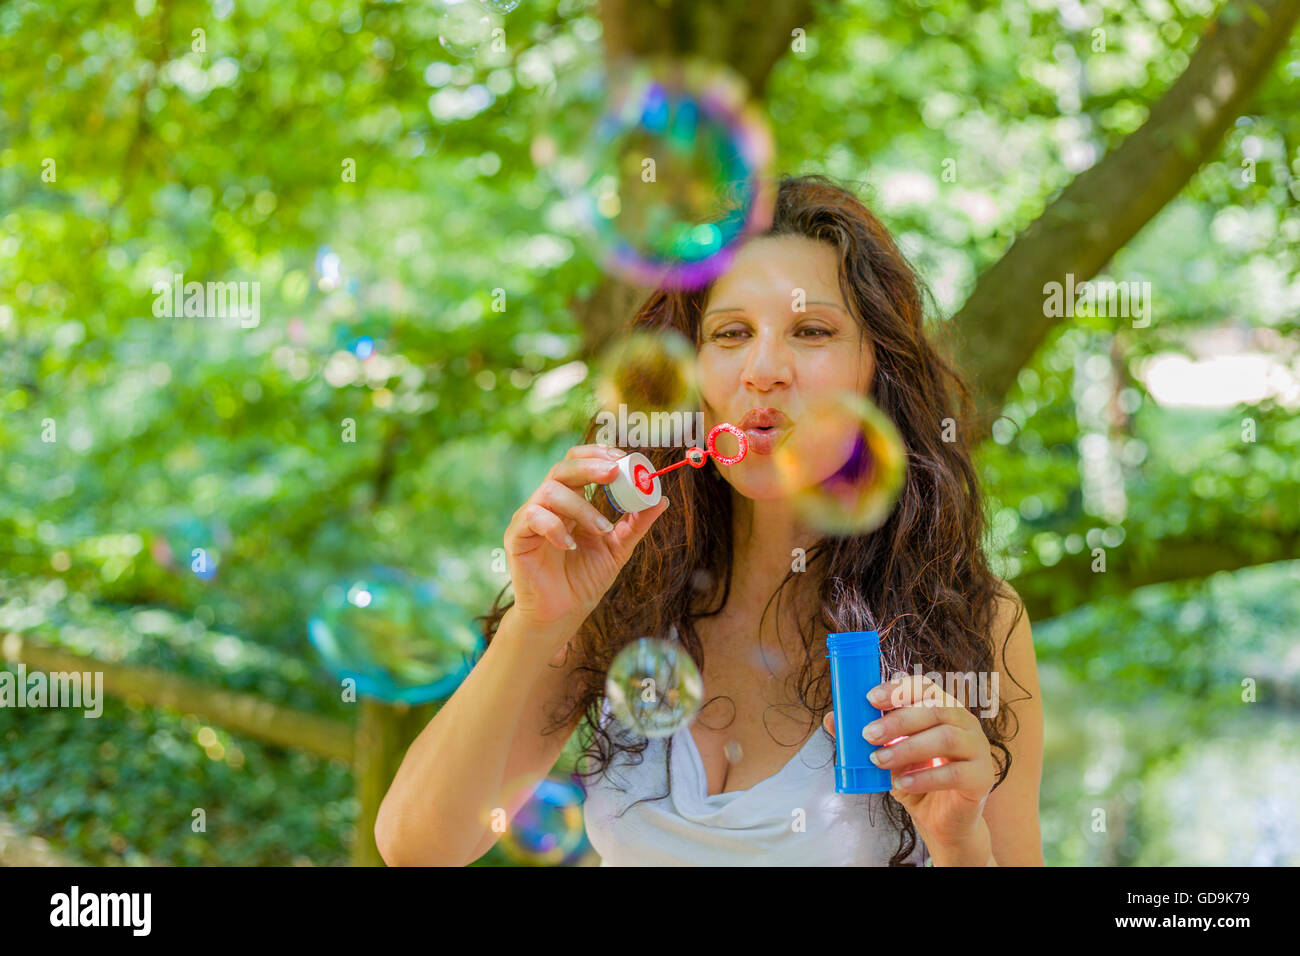 Fascinating mature adult woman is having fun like a child blowing soap bubbles in a public park Stock Photo